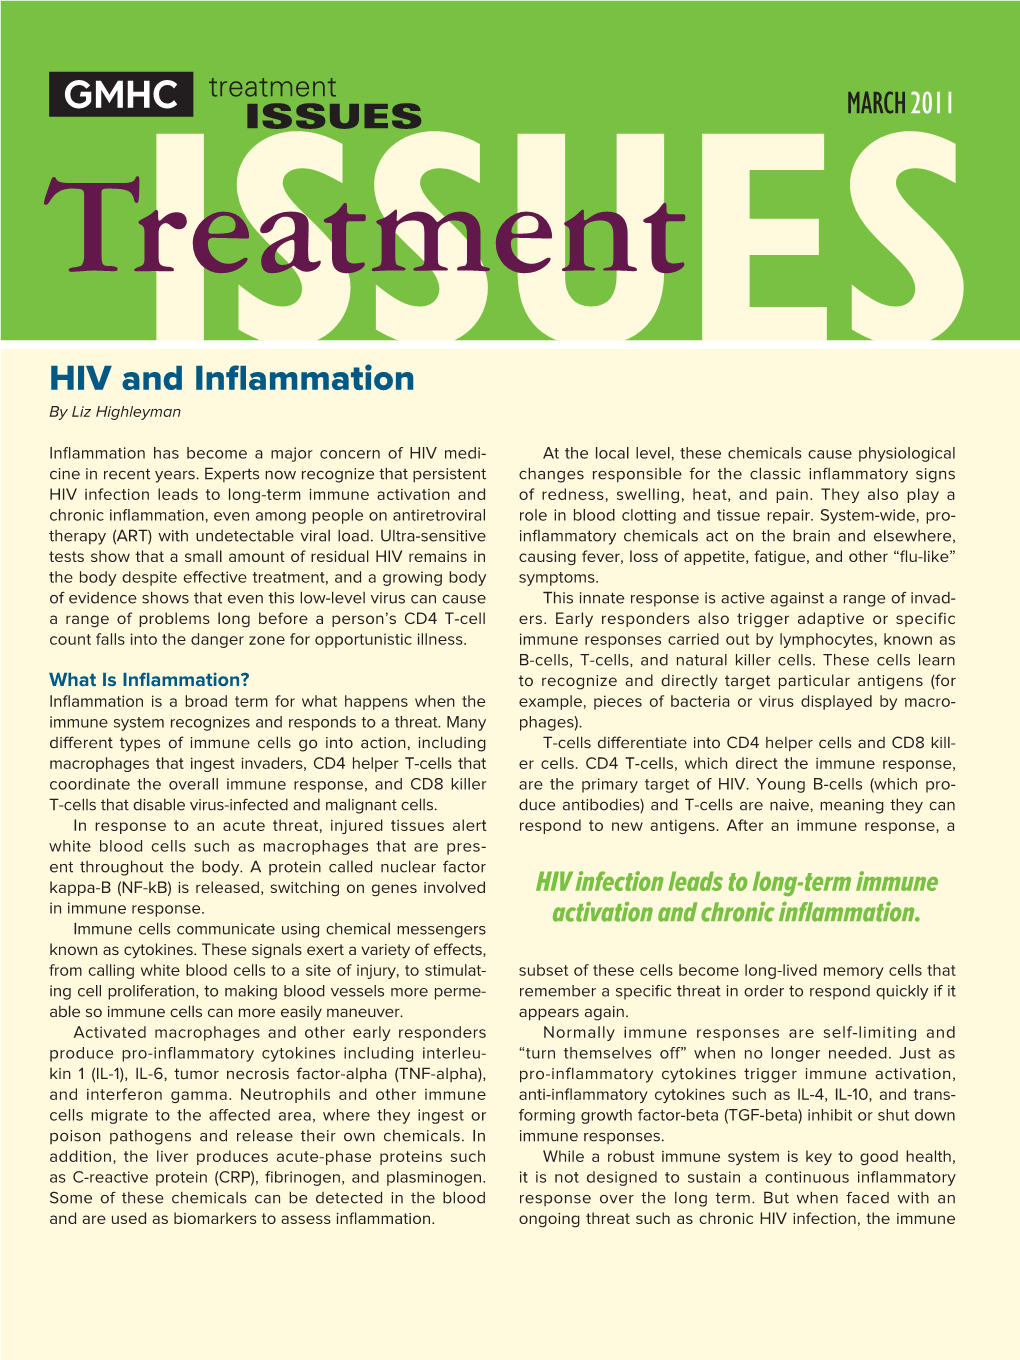 HIV and Inflammation